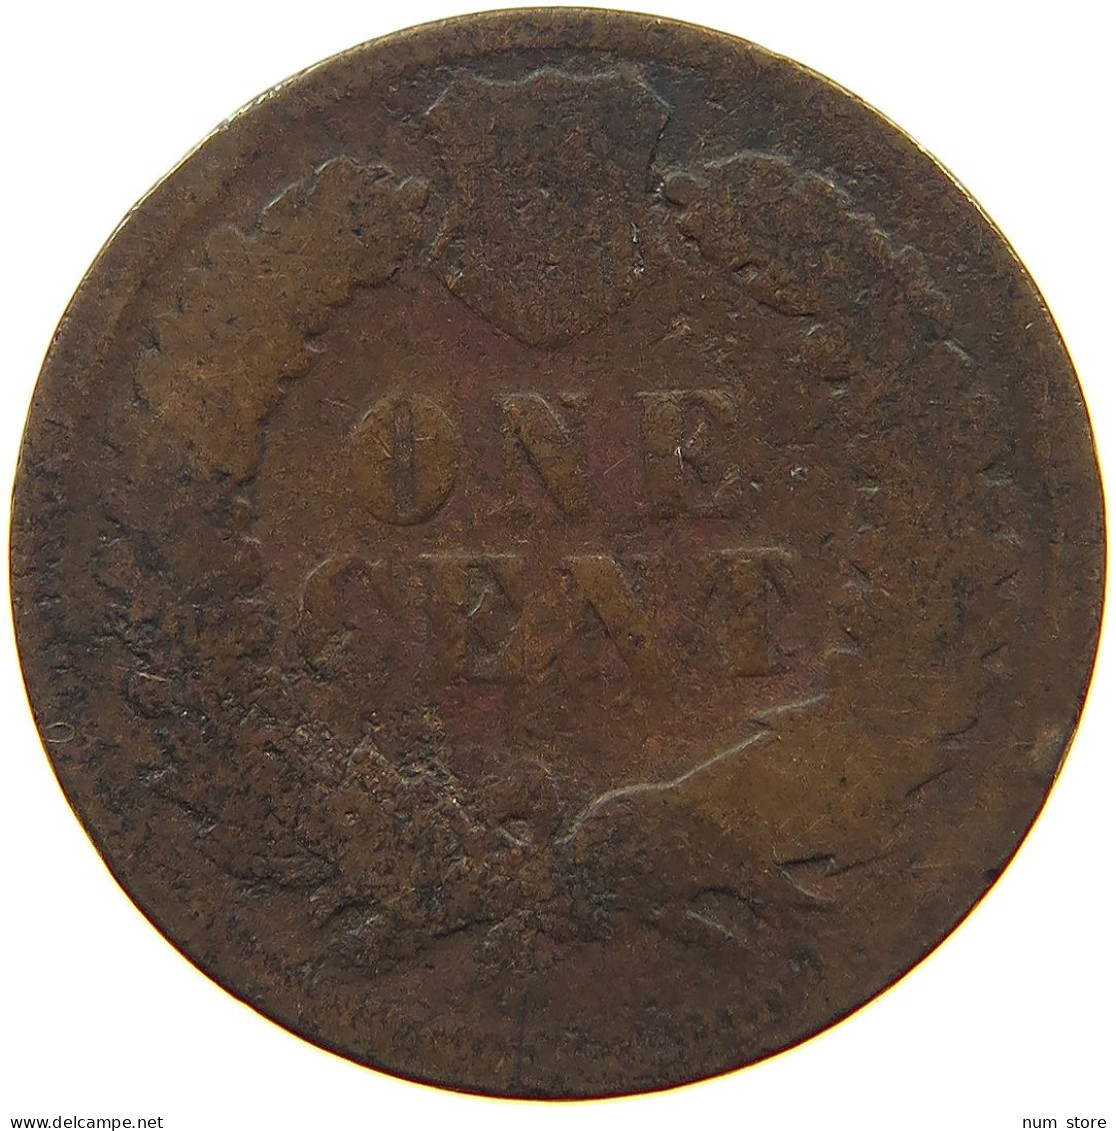 UNITED STATES OF AMERICA CENT 1894 INDIAN HEAD #s063 0371 - 1859-1909: Indian Head